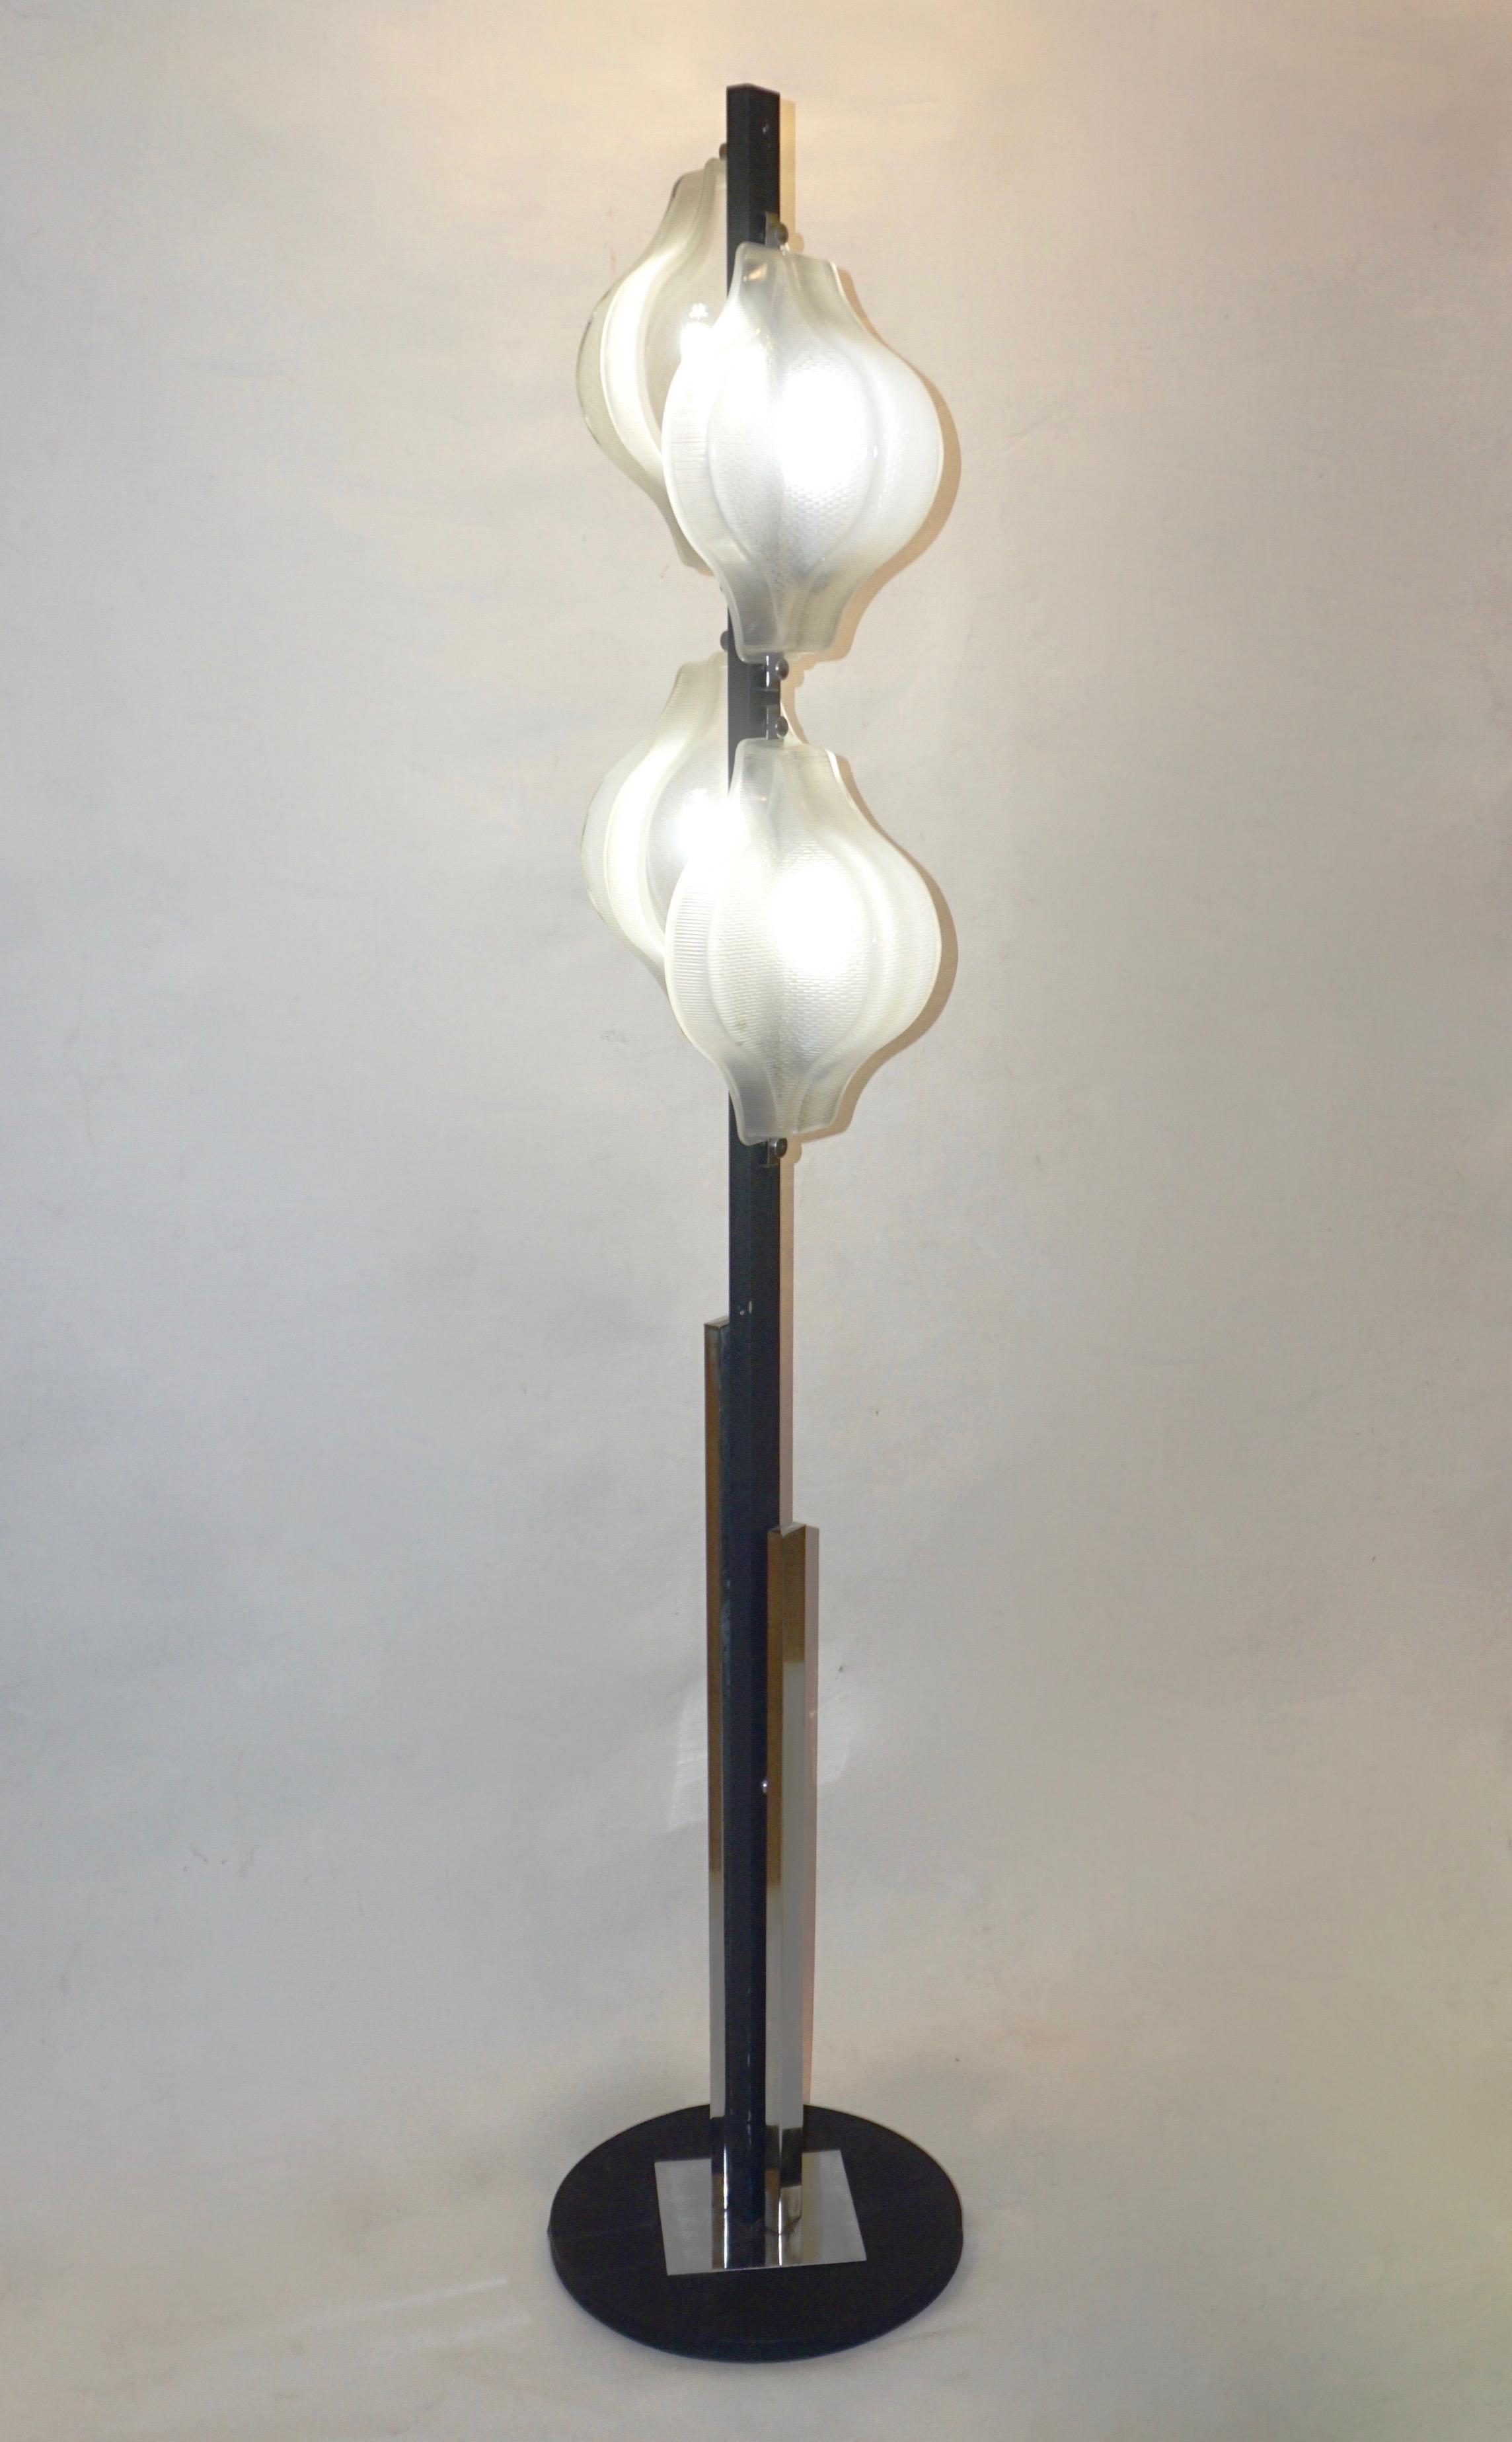 1960s Italian Pair of Minimalist White and Black Organic Chrome Floor Lamps For Sale 6